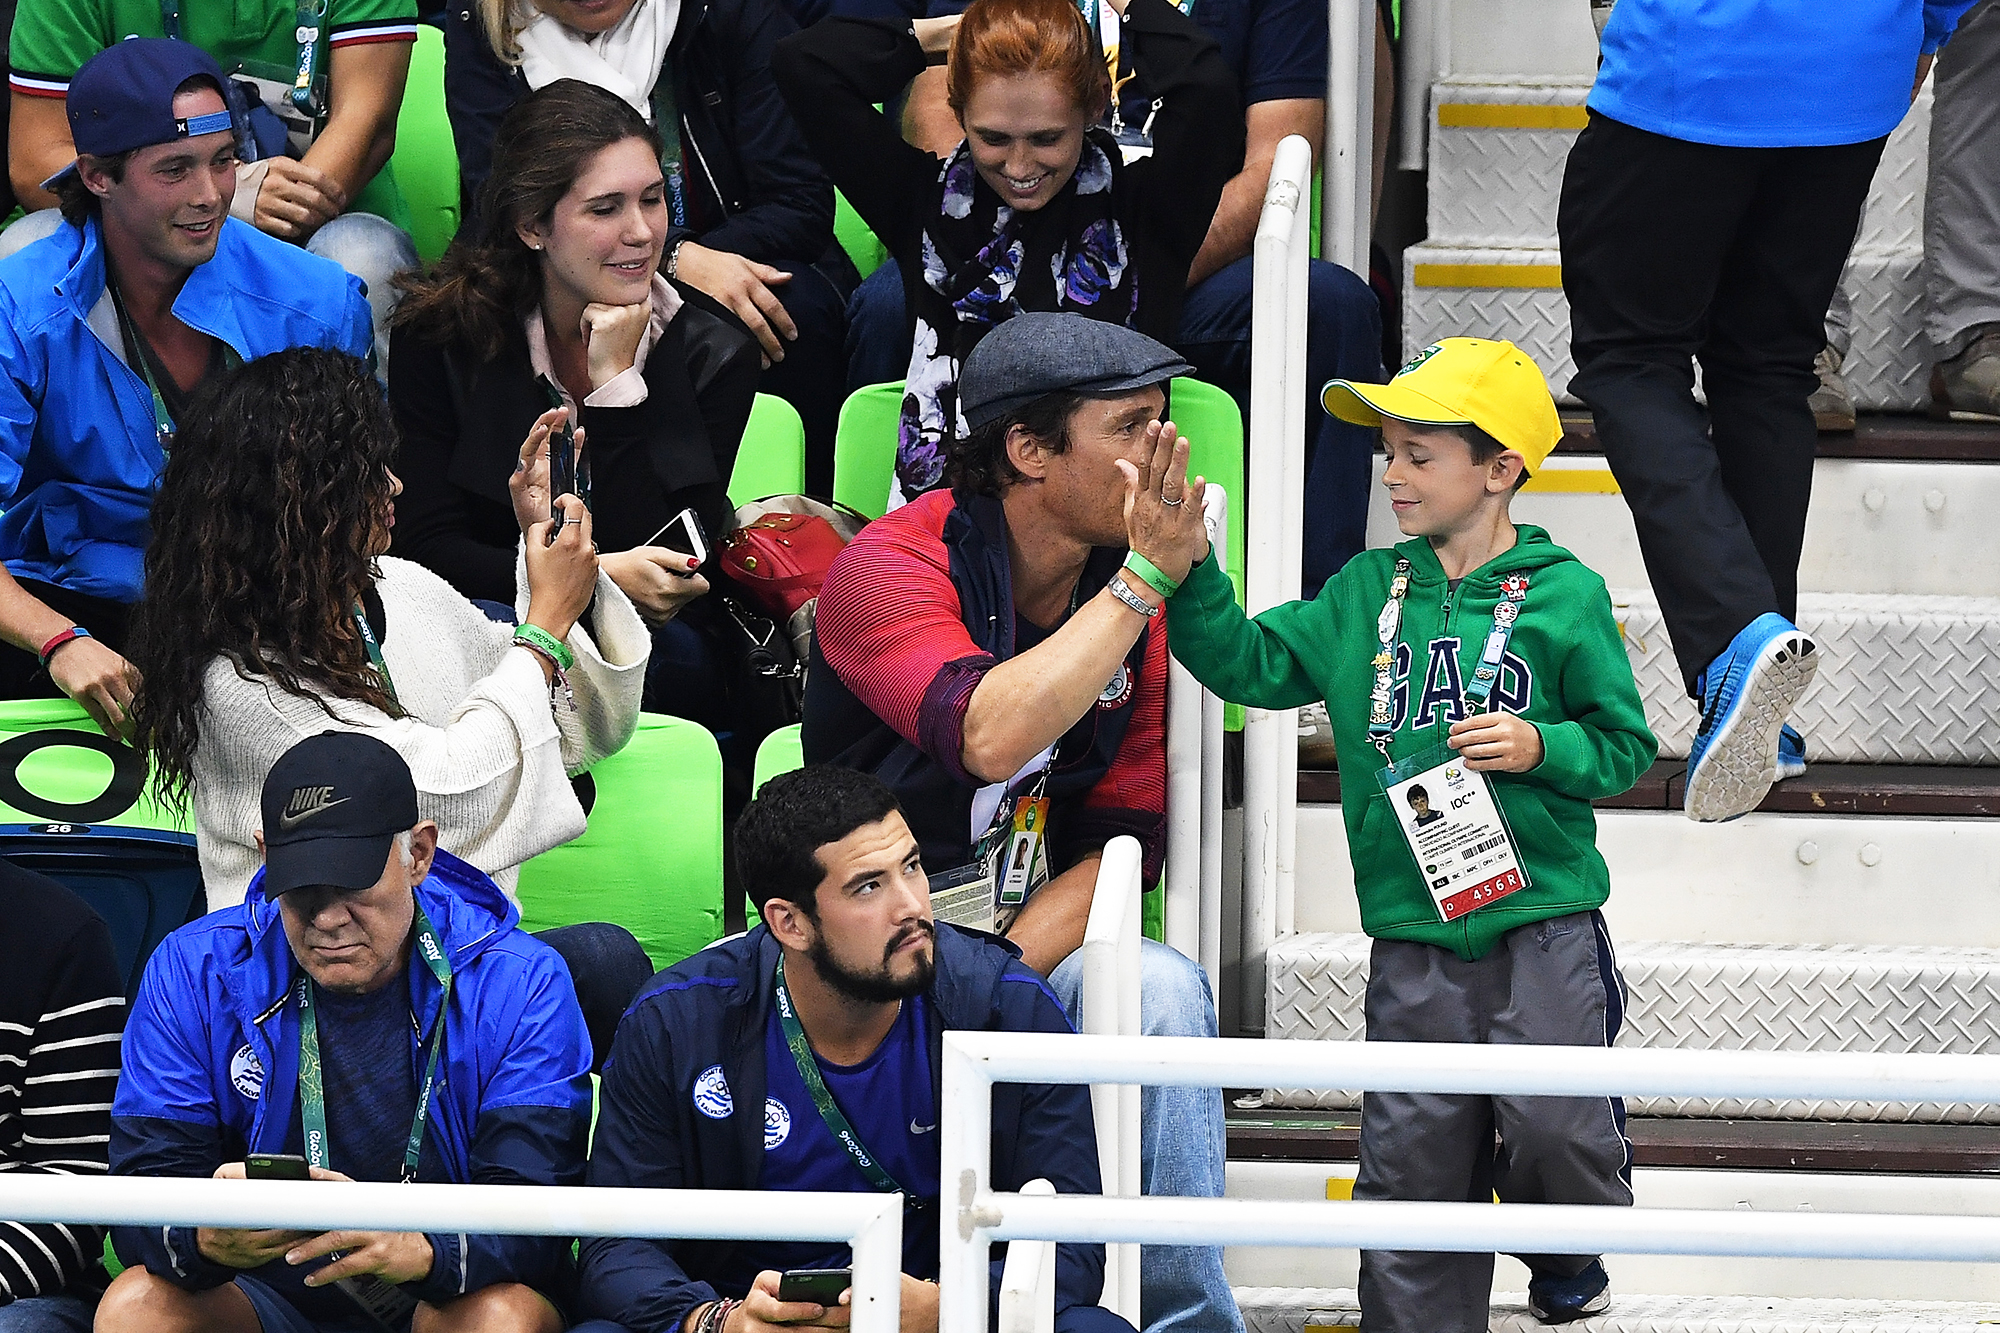 Matthew McConaughey gives a high five to a young boy during the swimming semifinals and finals on Day 5 of the Rio 2016 Olympic Games, on Aug. 9, 2016 in Rio de Janeiro, Brazil.